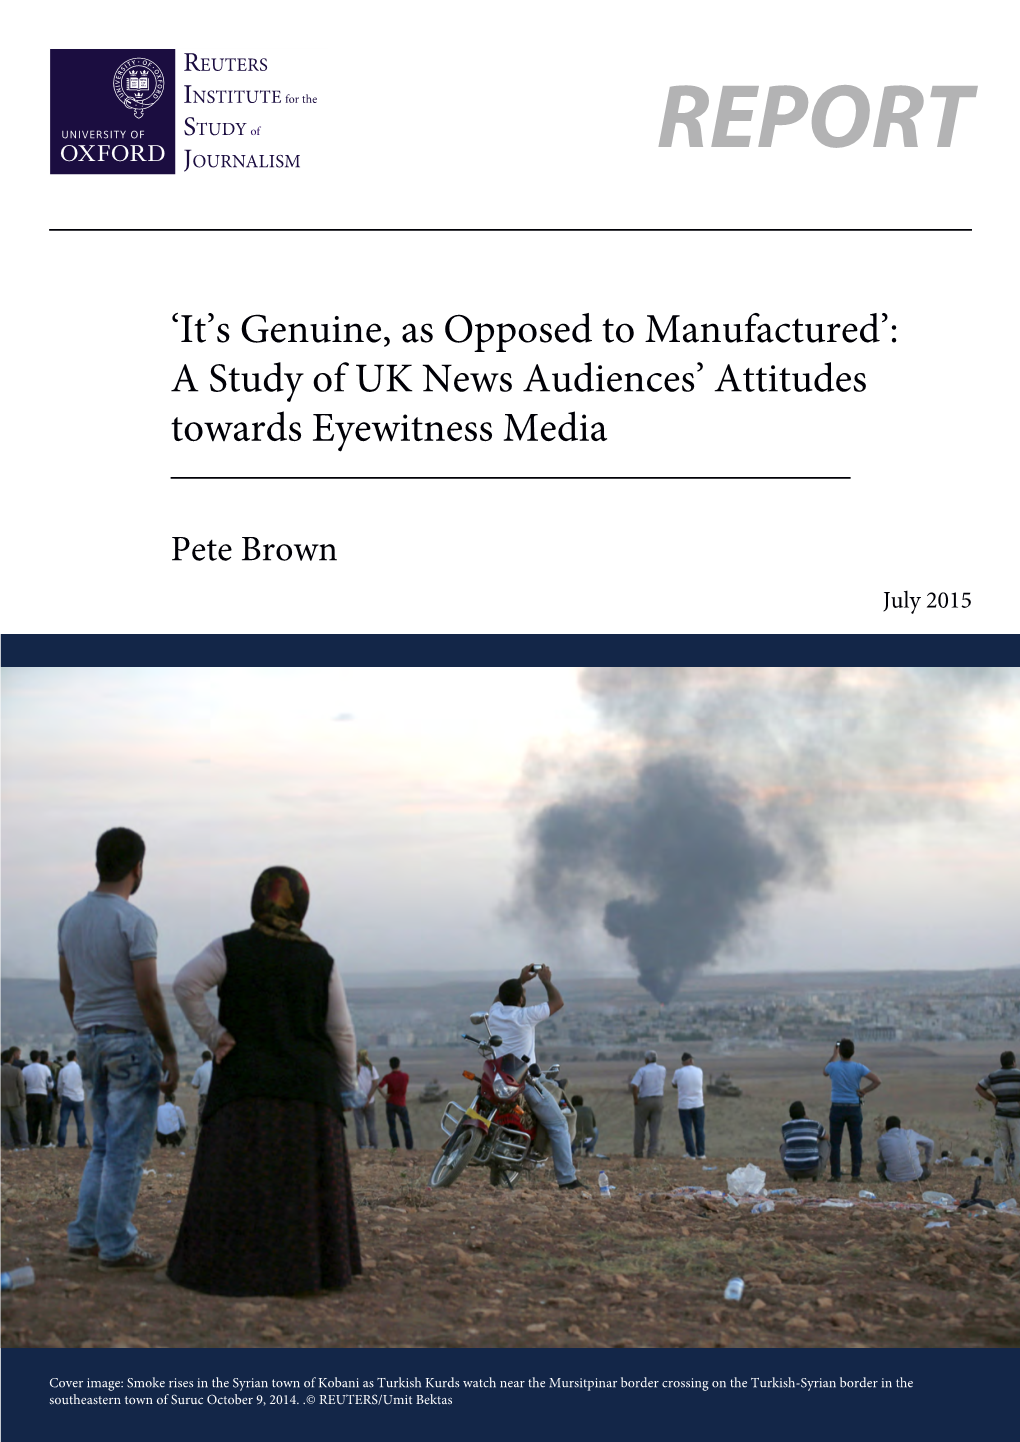 'It;S Genuine, As Opposed to Manufactured': a Study of UK News Audiences' Attitudes to Eyewitness Media